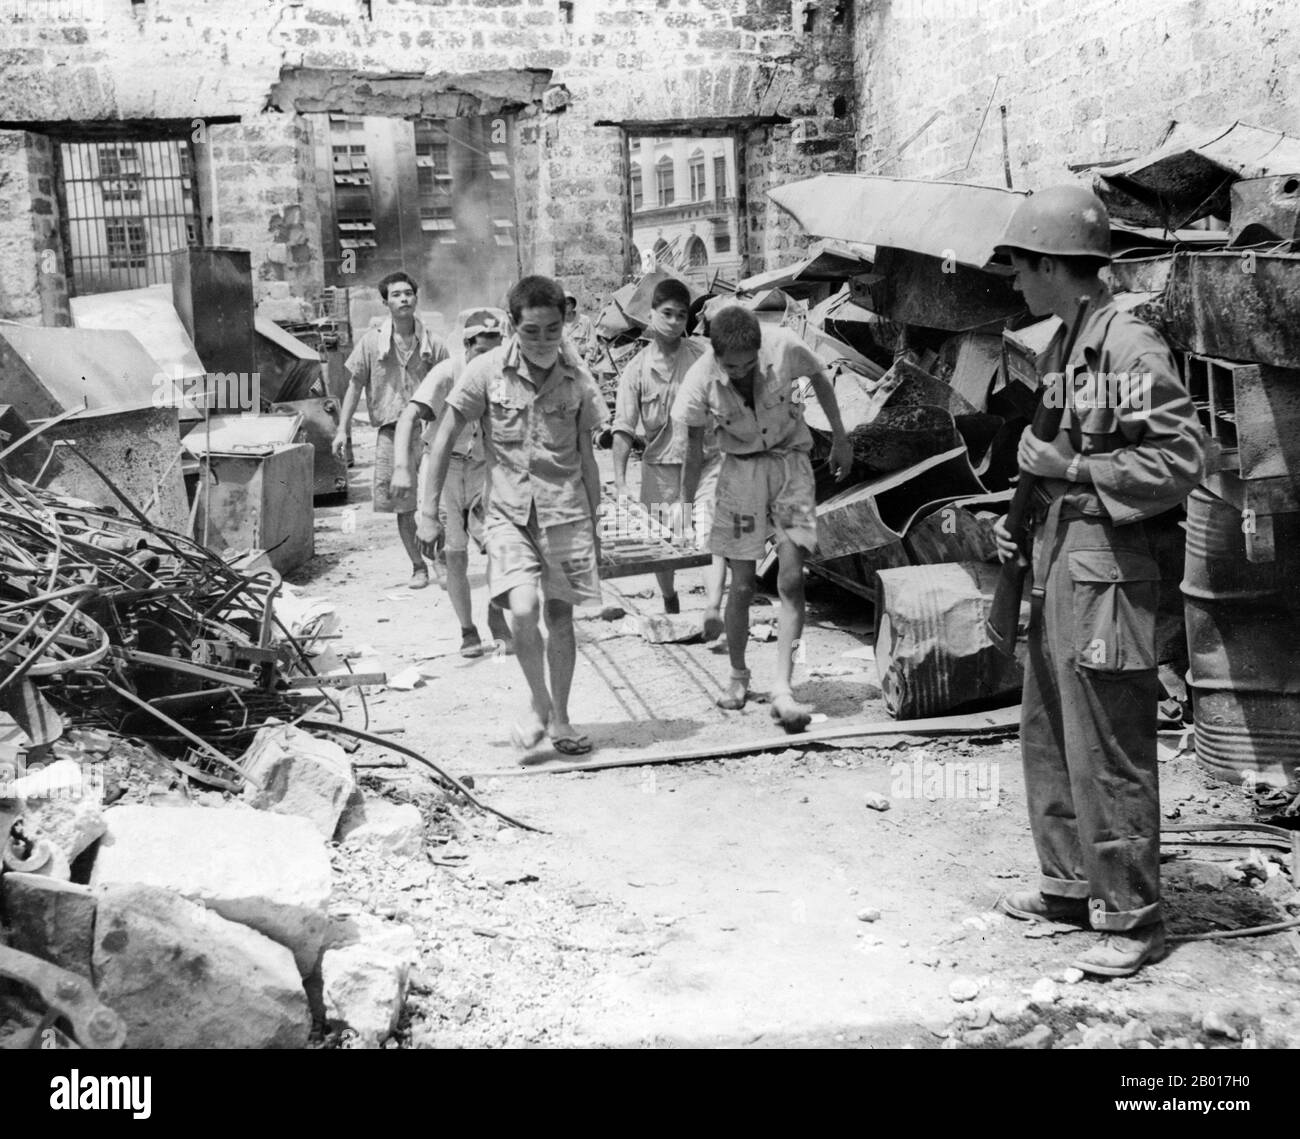 Philippines: Japanese prisoners of war under American military supervision, 1945.  Japanese prisoners of war helping in the massive cleanup after the Battle of Manila in 1945. Stock Photo